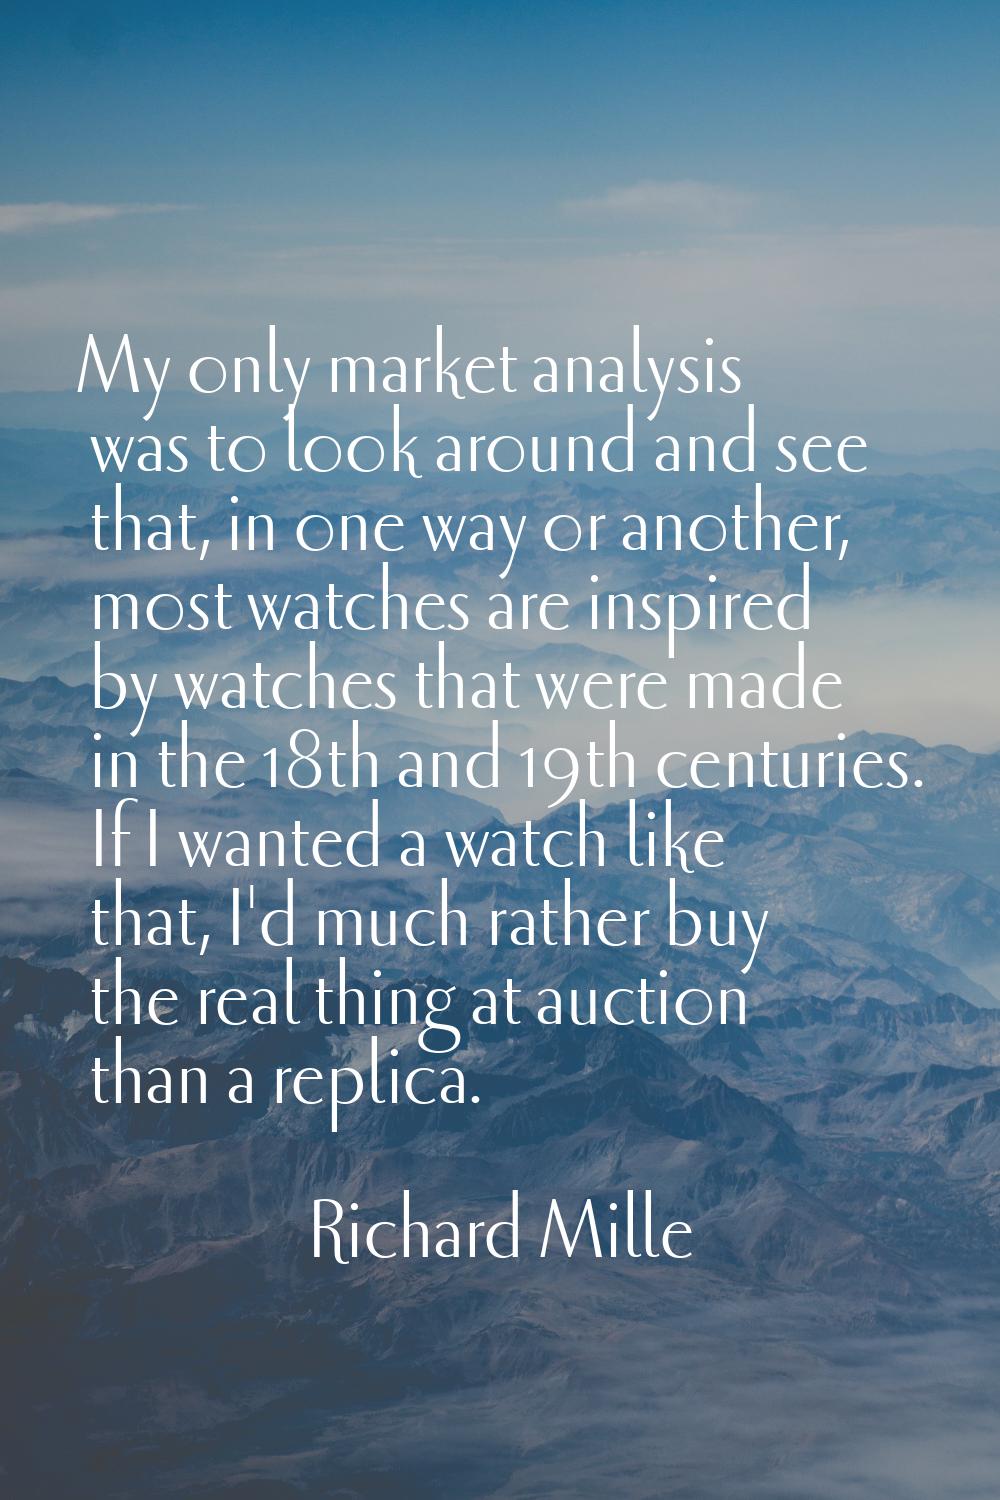 My only market analysis was to look around and see that, in one way or another, most watches are in